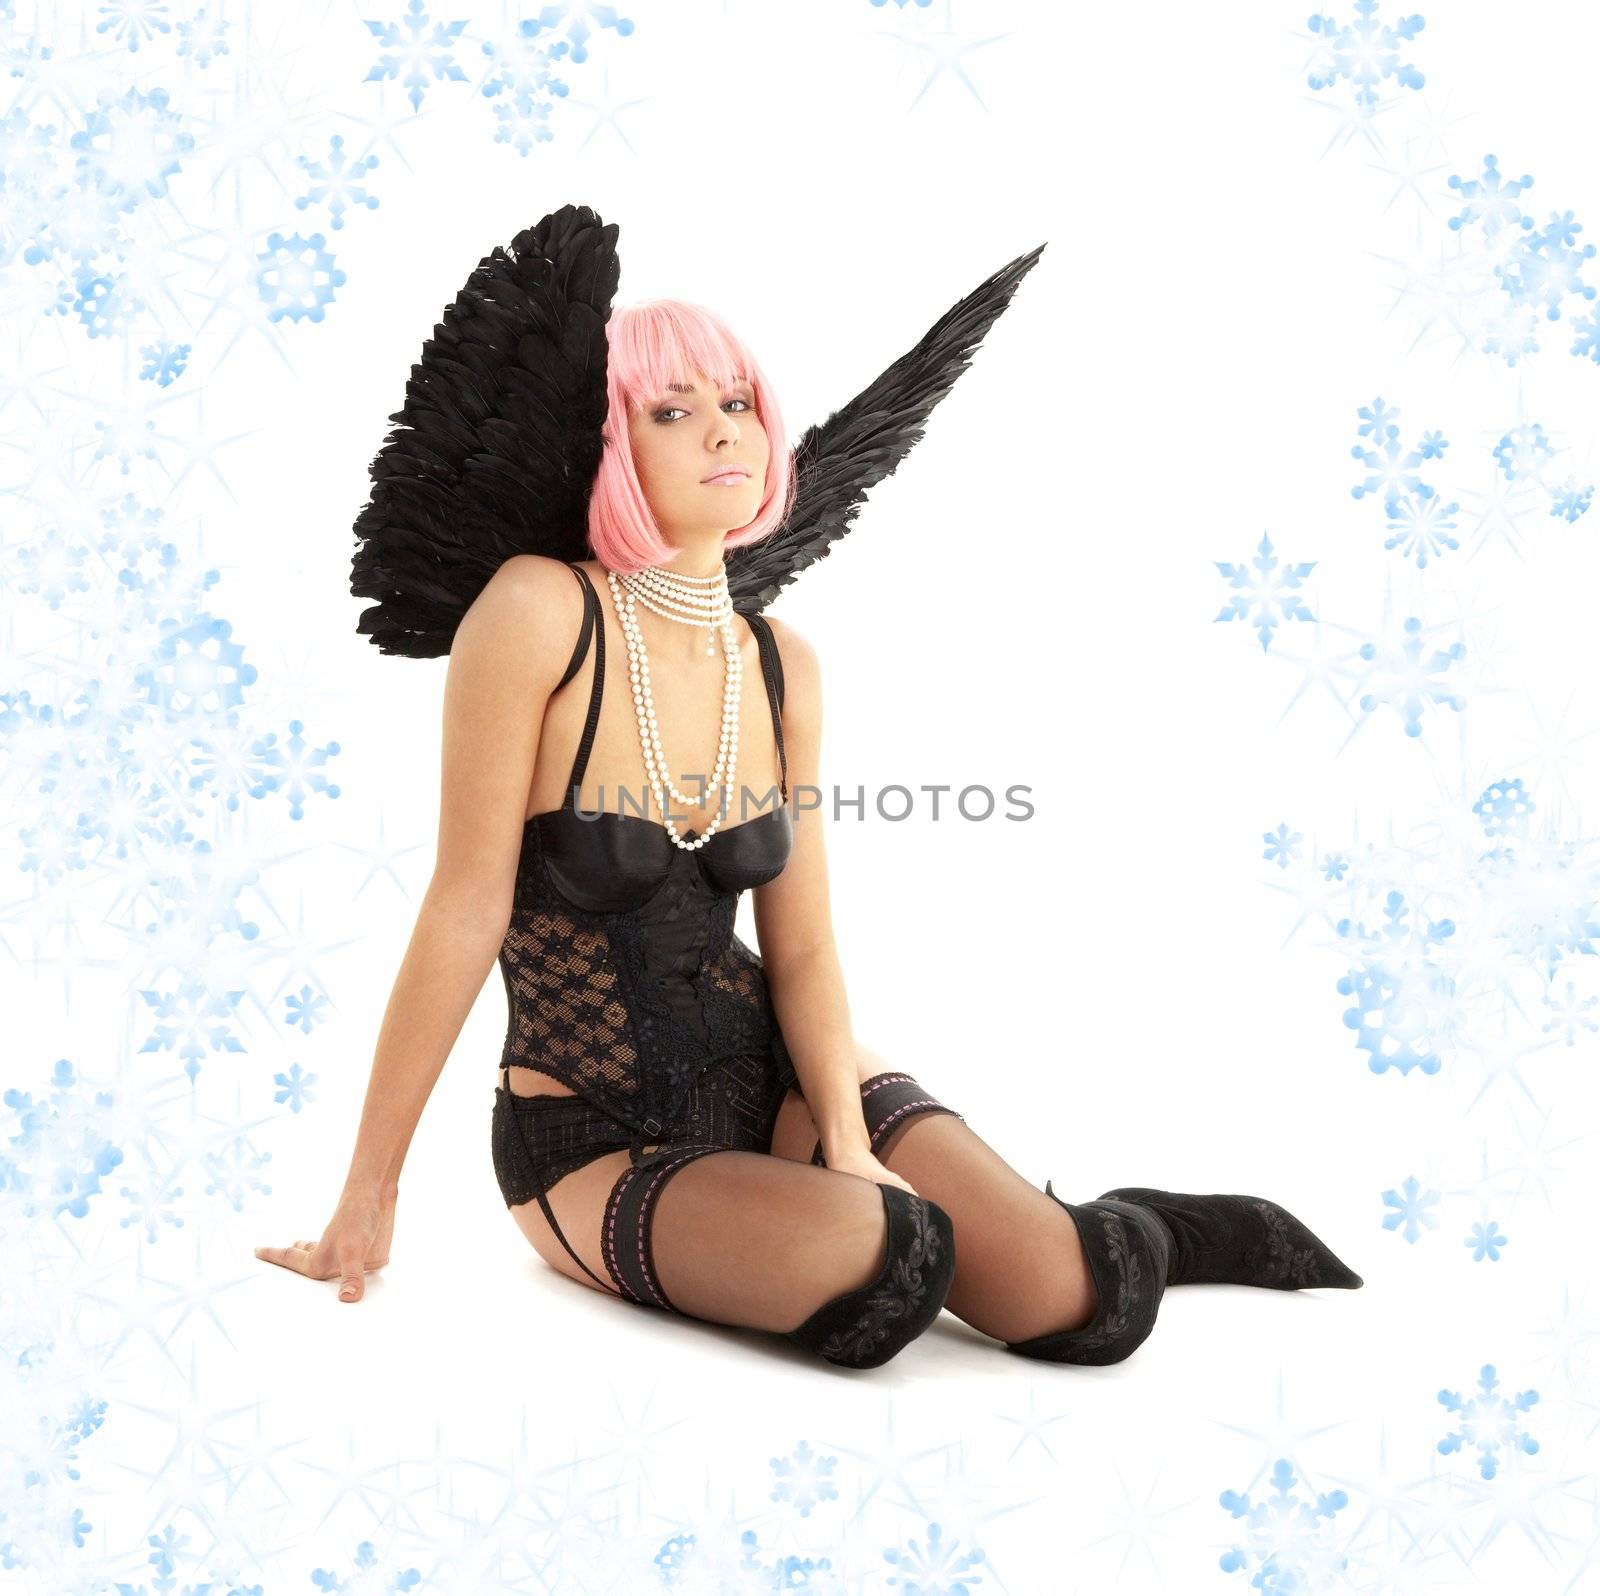 black lingerie angel with pink hair and snowflakes by dolgachov